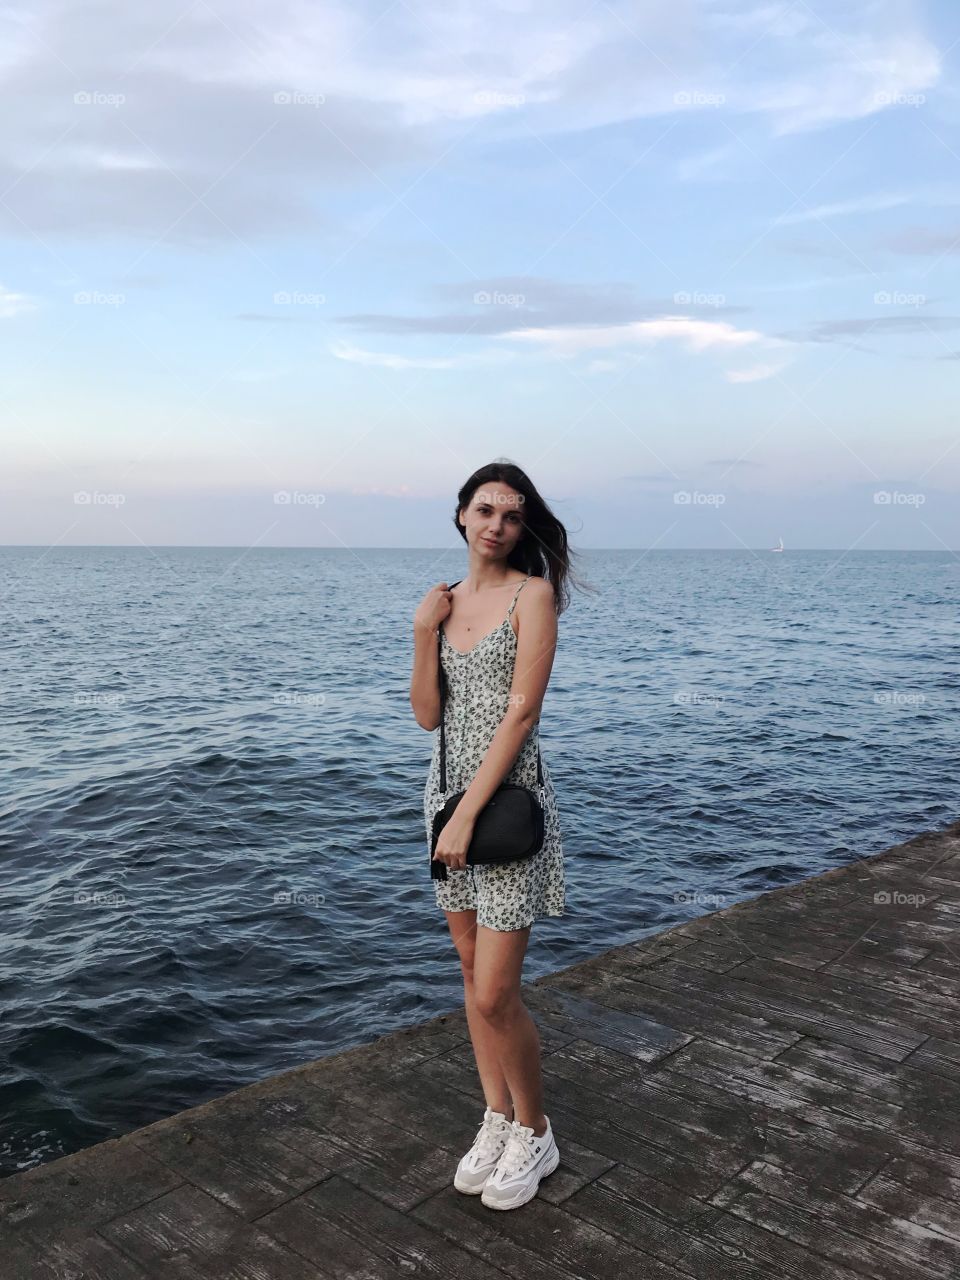 Black Sea and the girl 